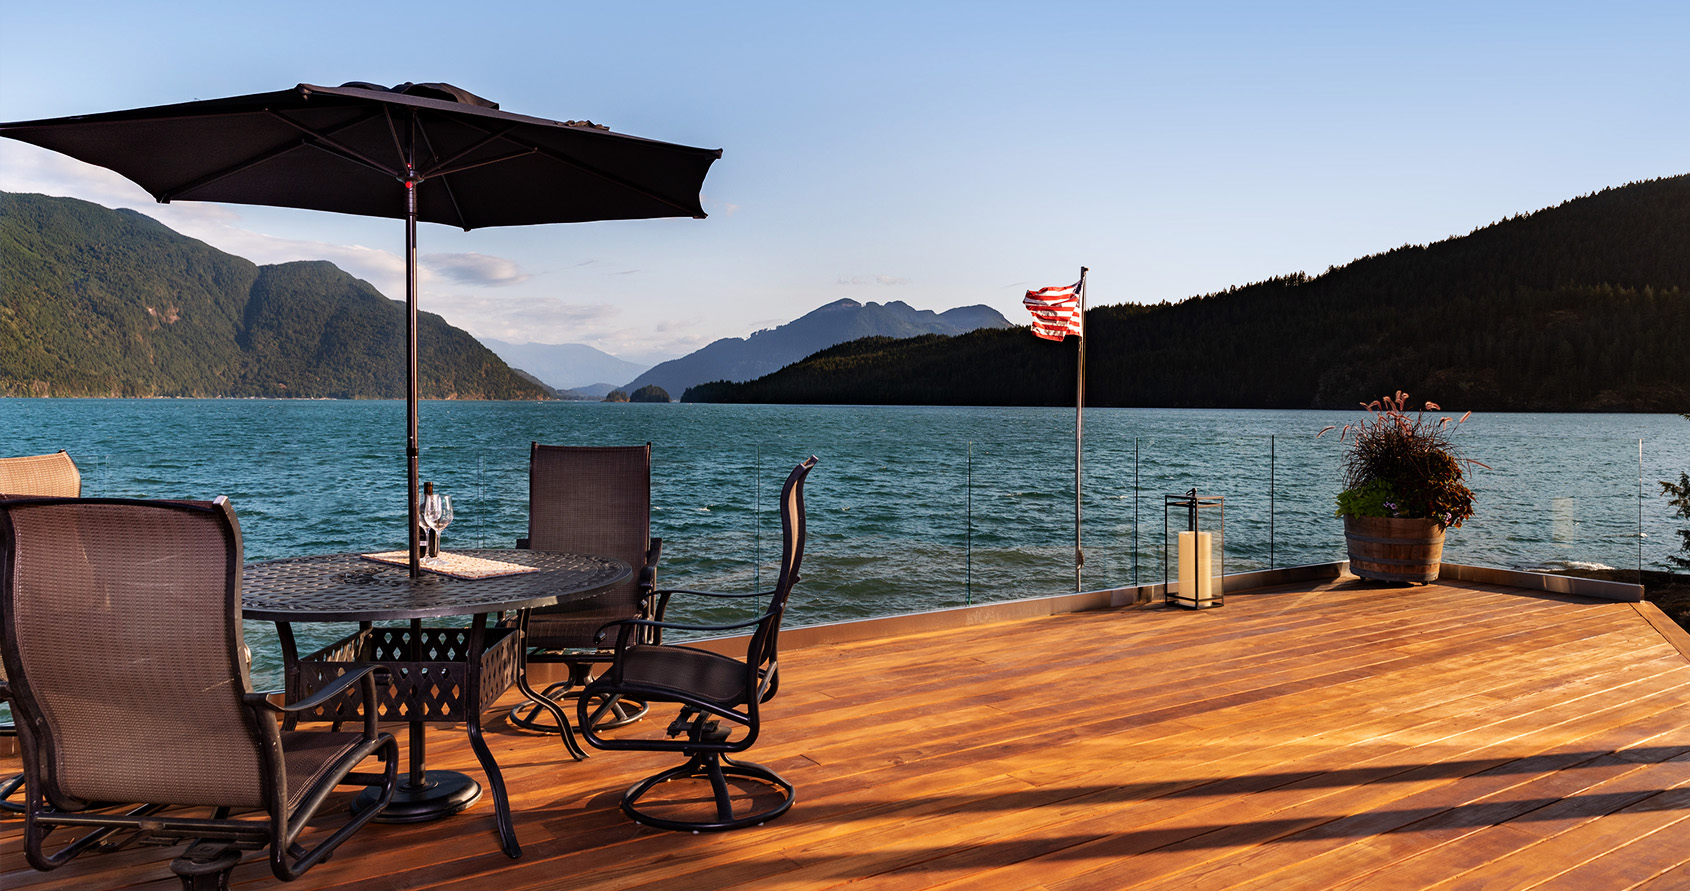 The redwood deck offers exceptional views of the lake